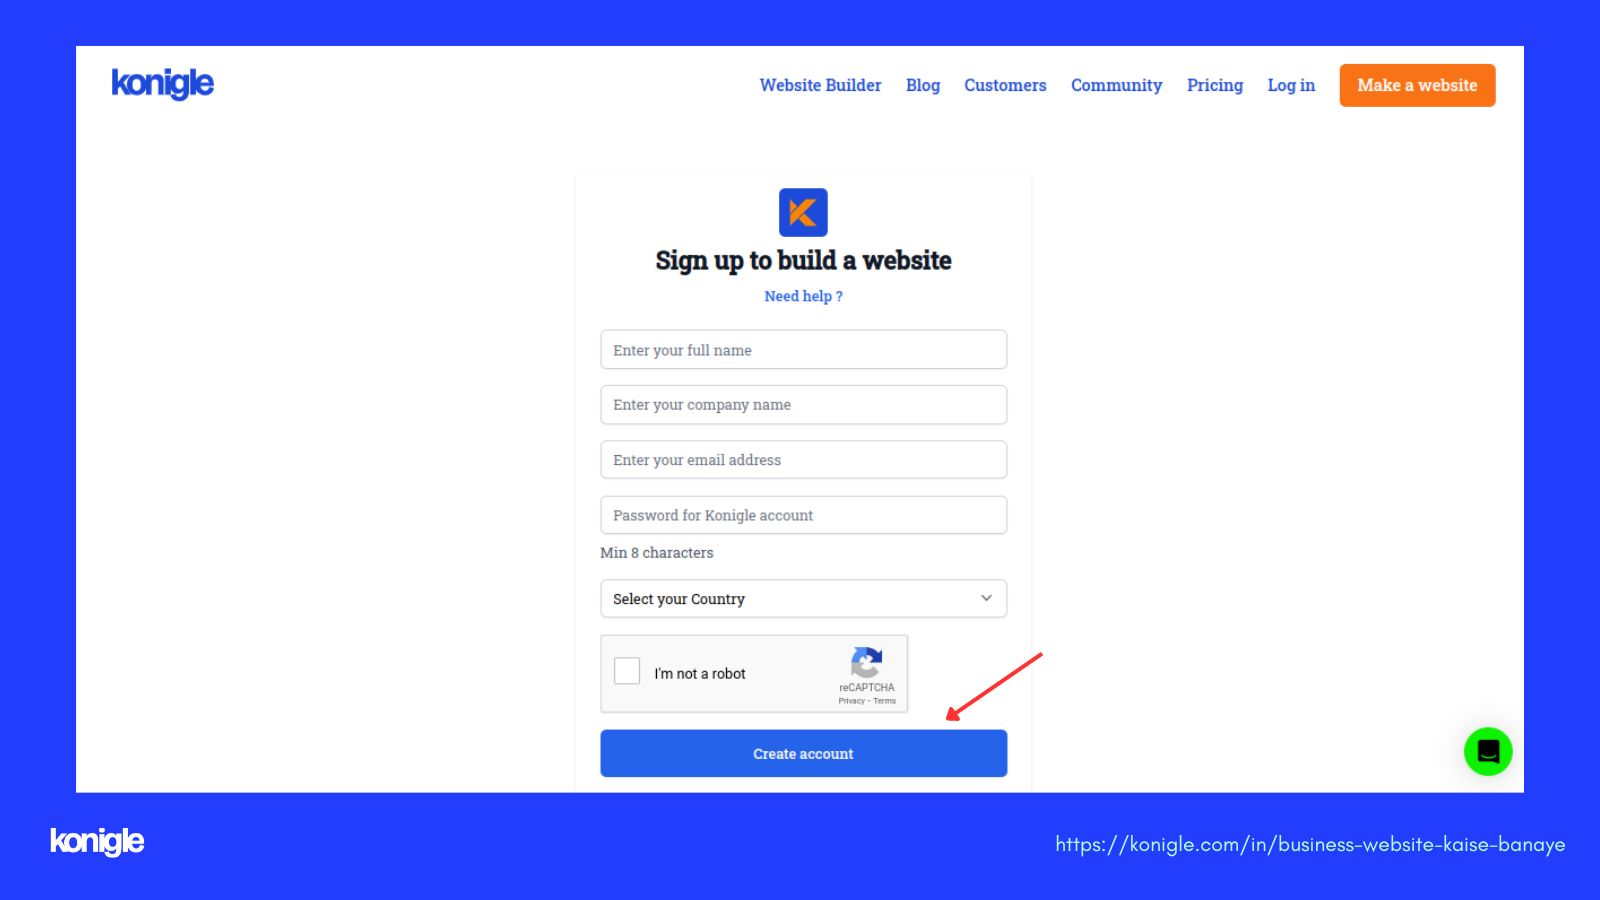 Konigle signup flow for business website - Create account